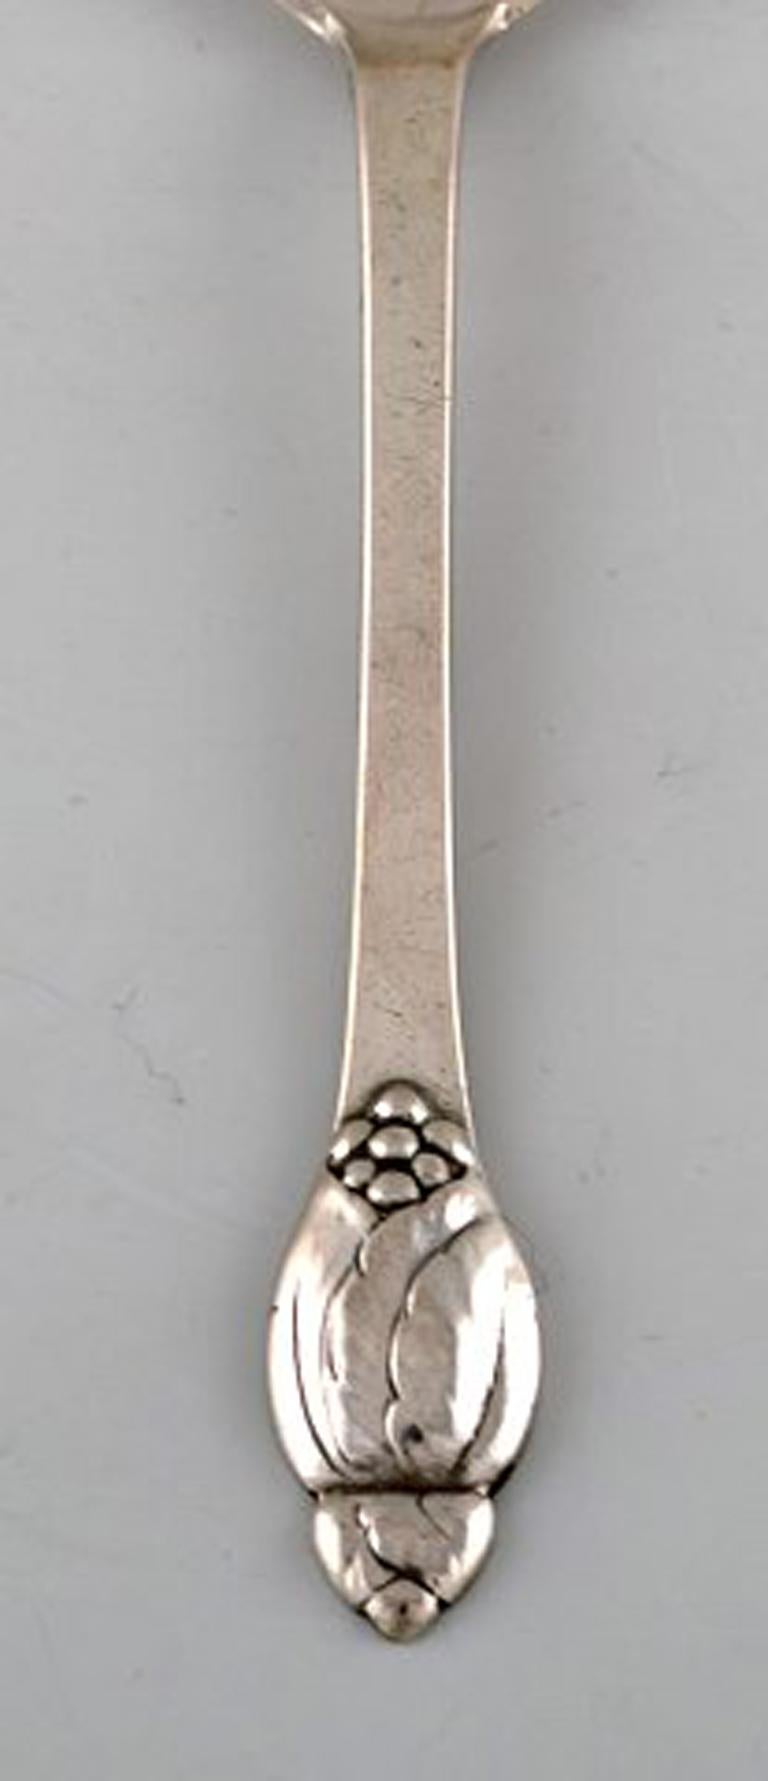 Evald Nielsen number 6, coffee spoon in all silver. 1920's. Ten pieces in stock.
Measures: 11,5 cm.
Stamped.
In perfect condition